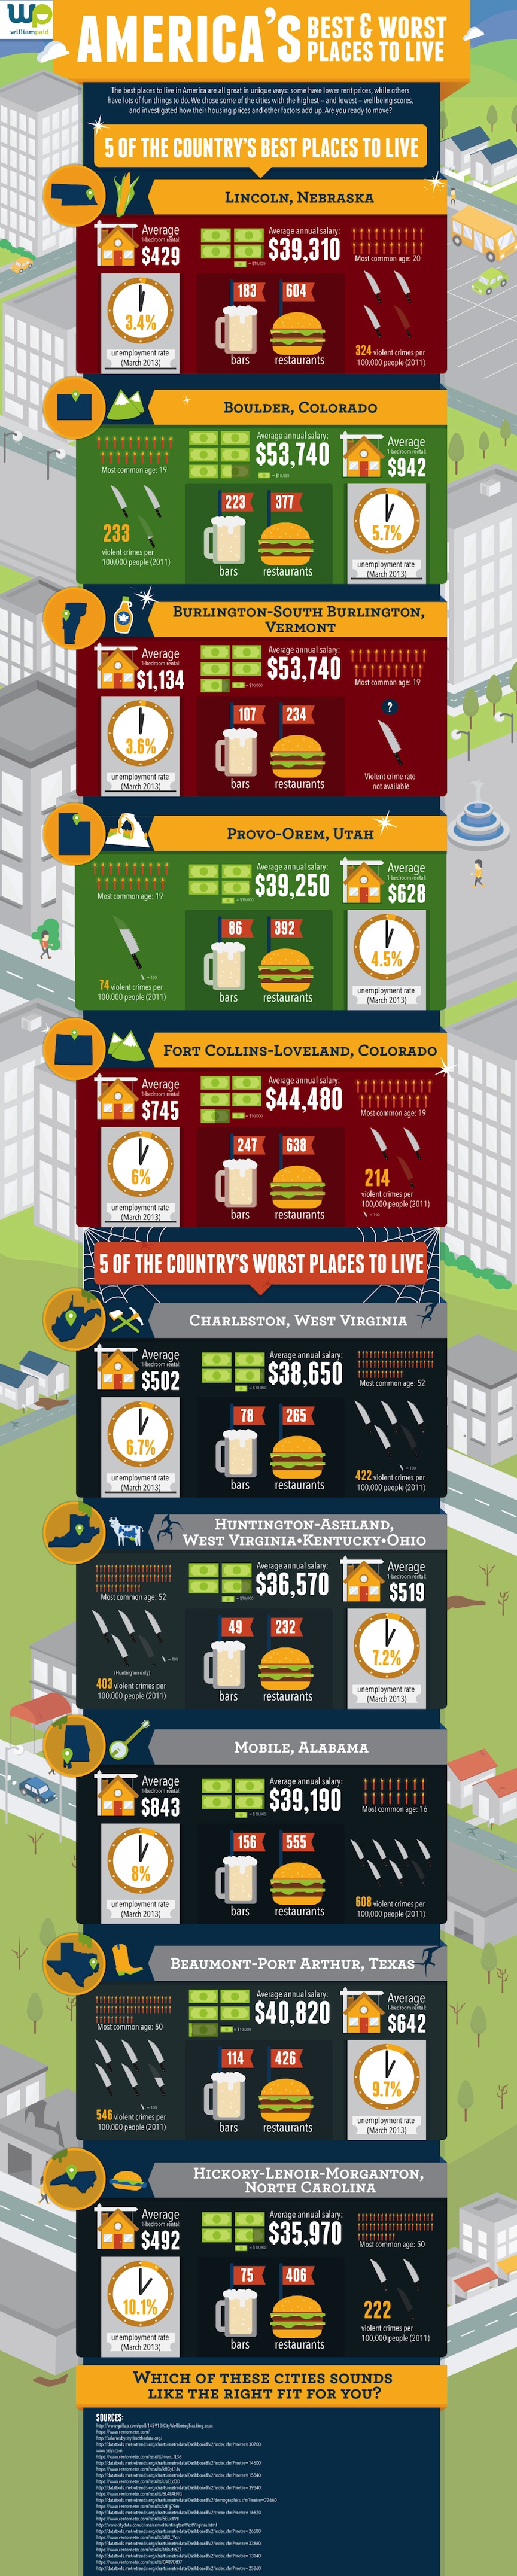 America's Best & Worst Place To Live